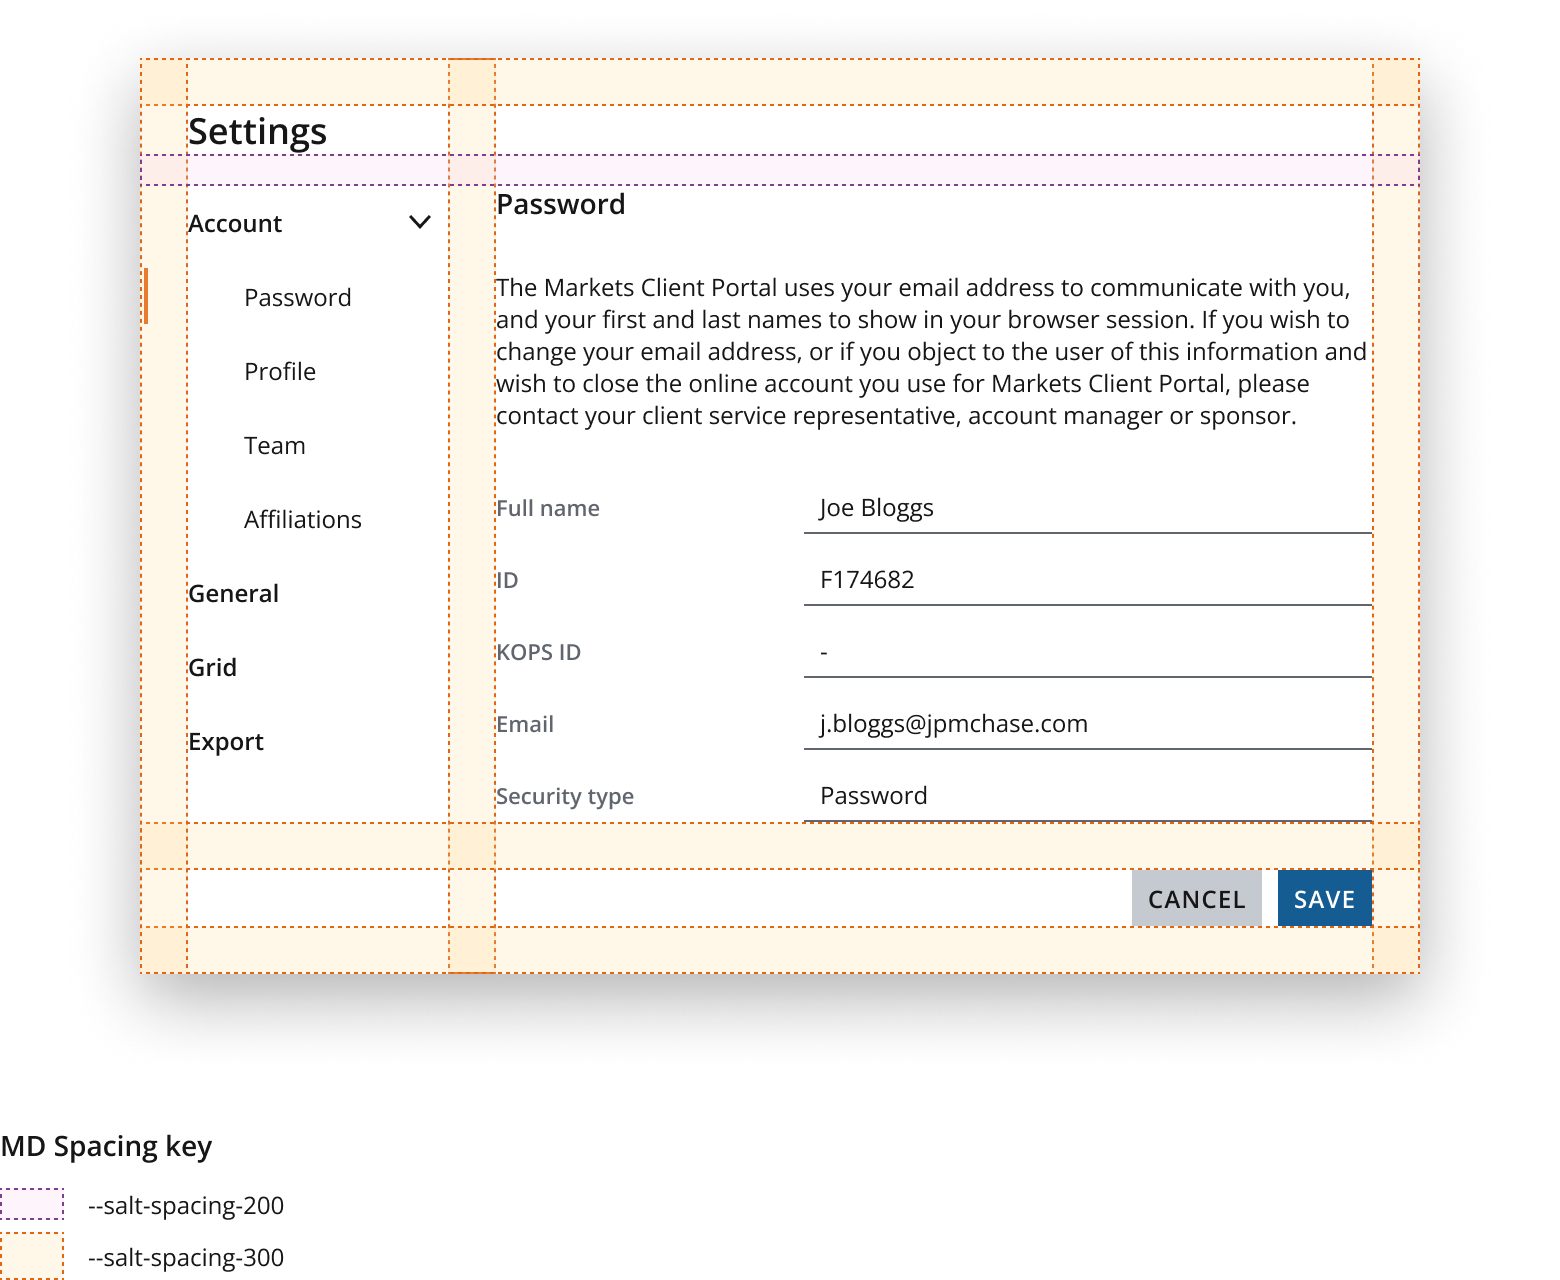 Example showing a preferences dialog's layout construction.